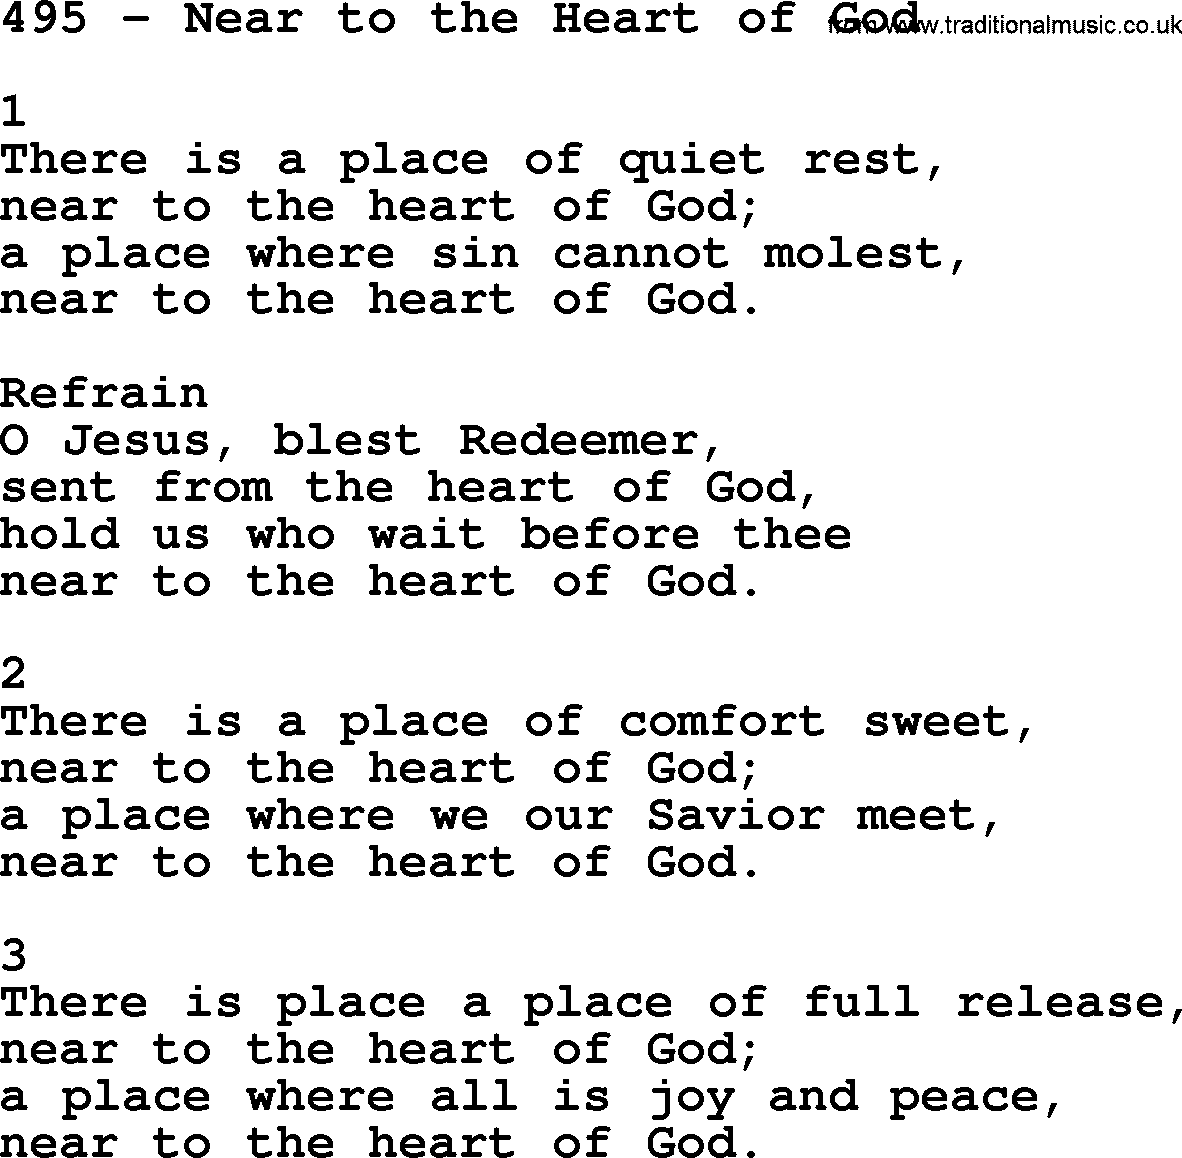 Complete Adventis Hymnal, title: 495-Near To The Heart Of God, with lyrics, midi, mp3, powerpoints(PPT) and PDF,